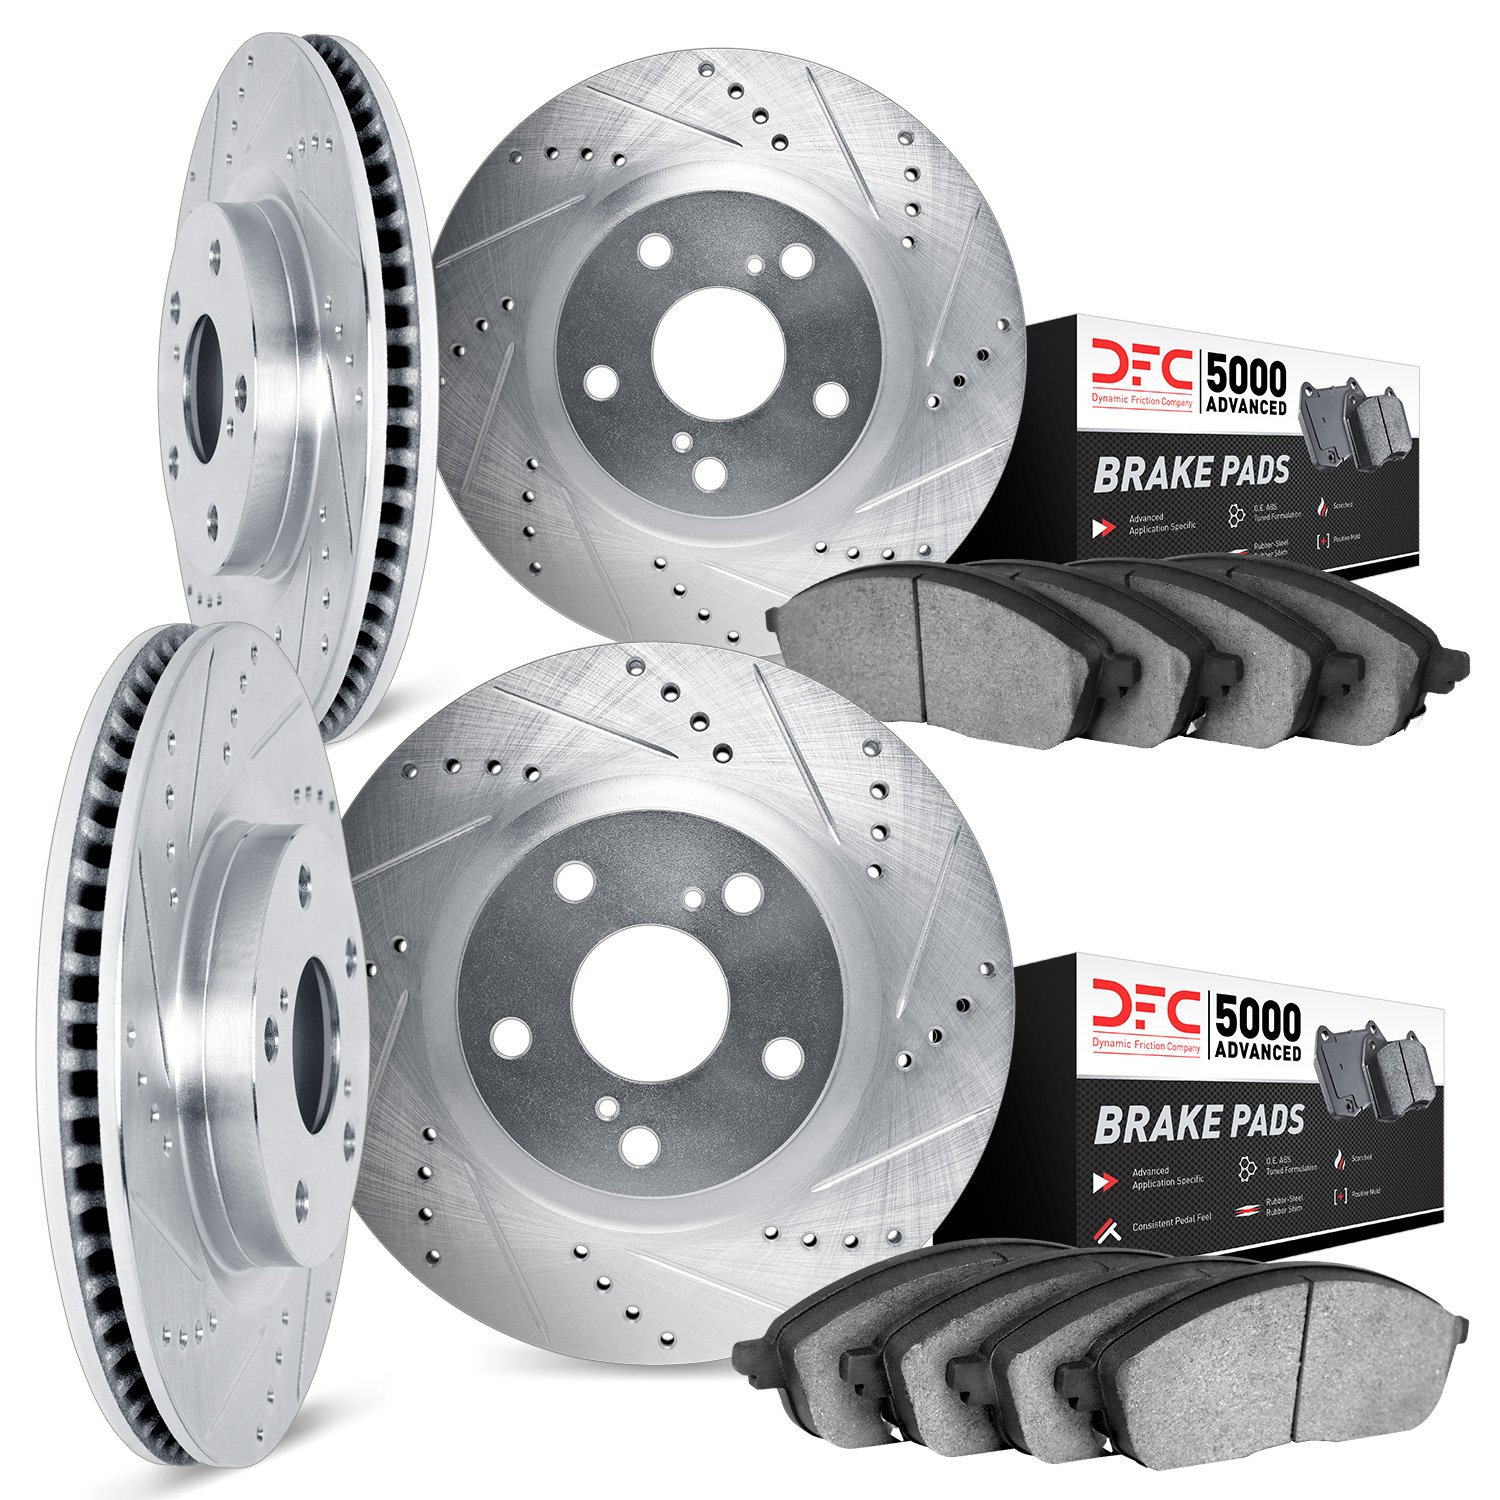 7504-73008 Drilled/Slotted Brake Rotors w/5000 Advanced Brake Pads Kit [Silver], 2014-2018 Audi/Volkswagen, Position: Front and